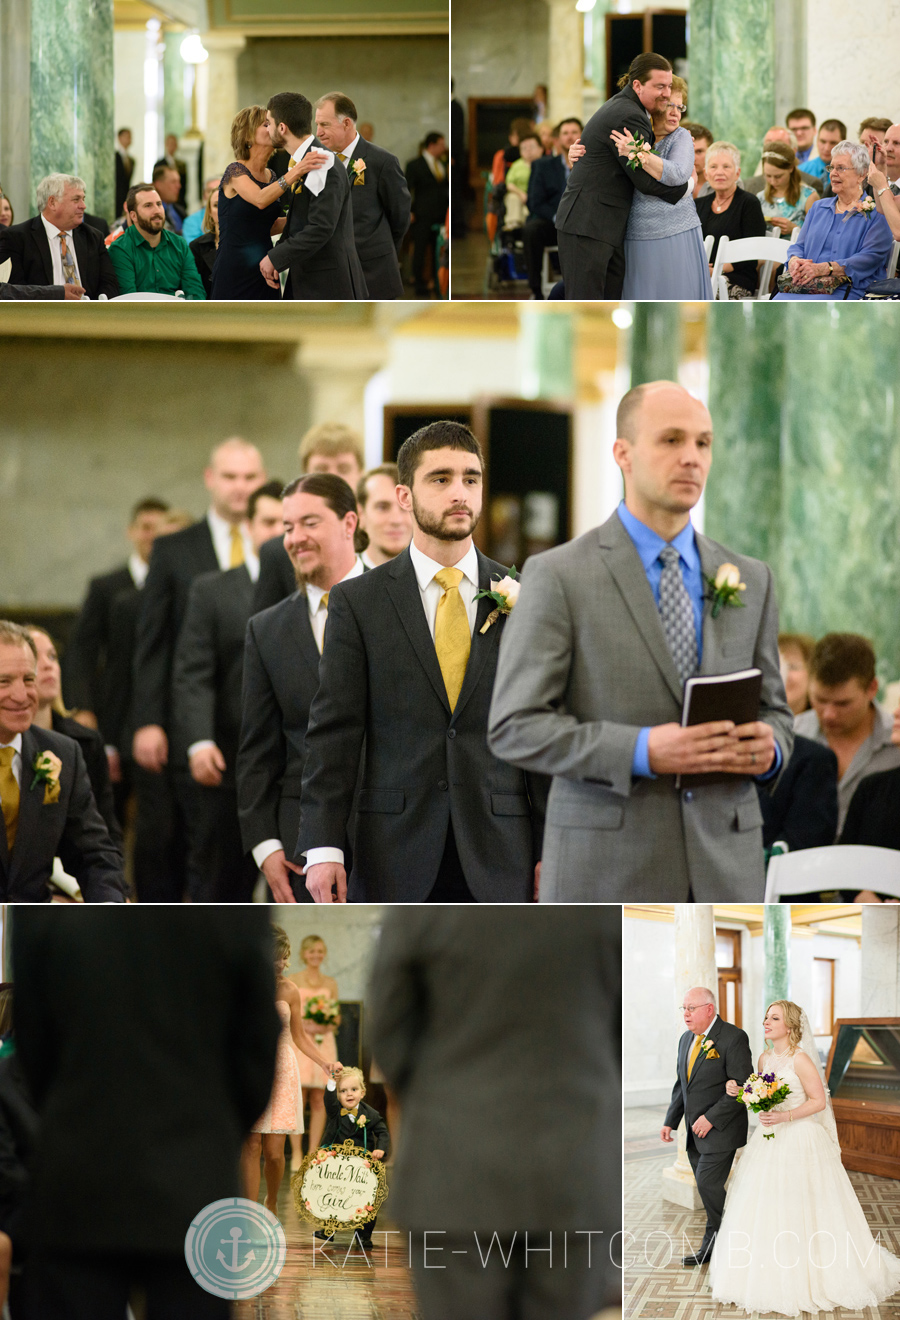 Allen County Courthouse Wedding Ceremony